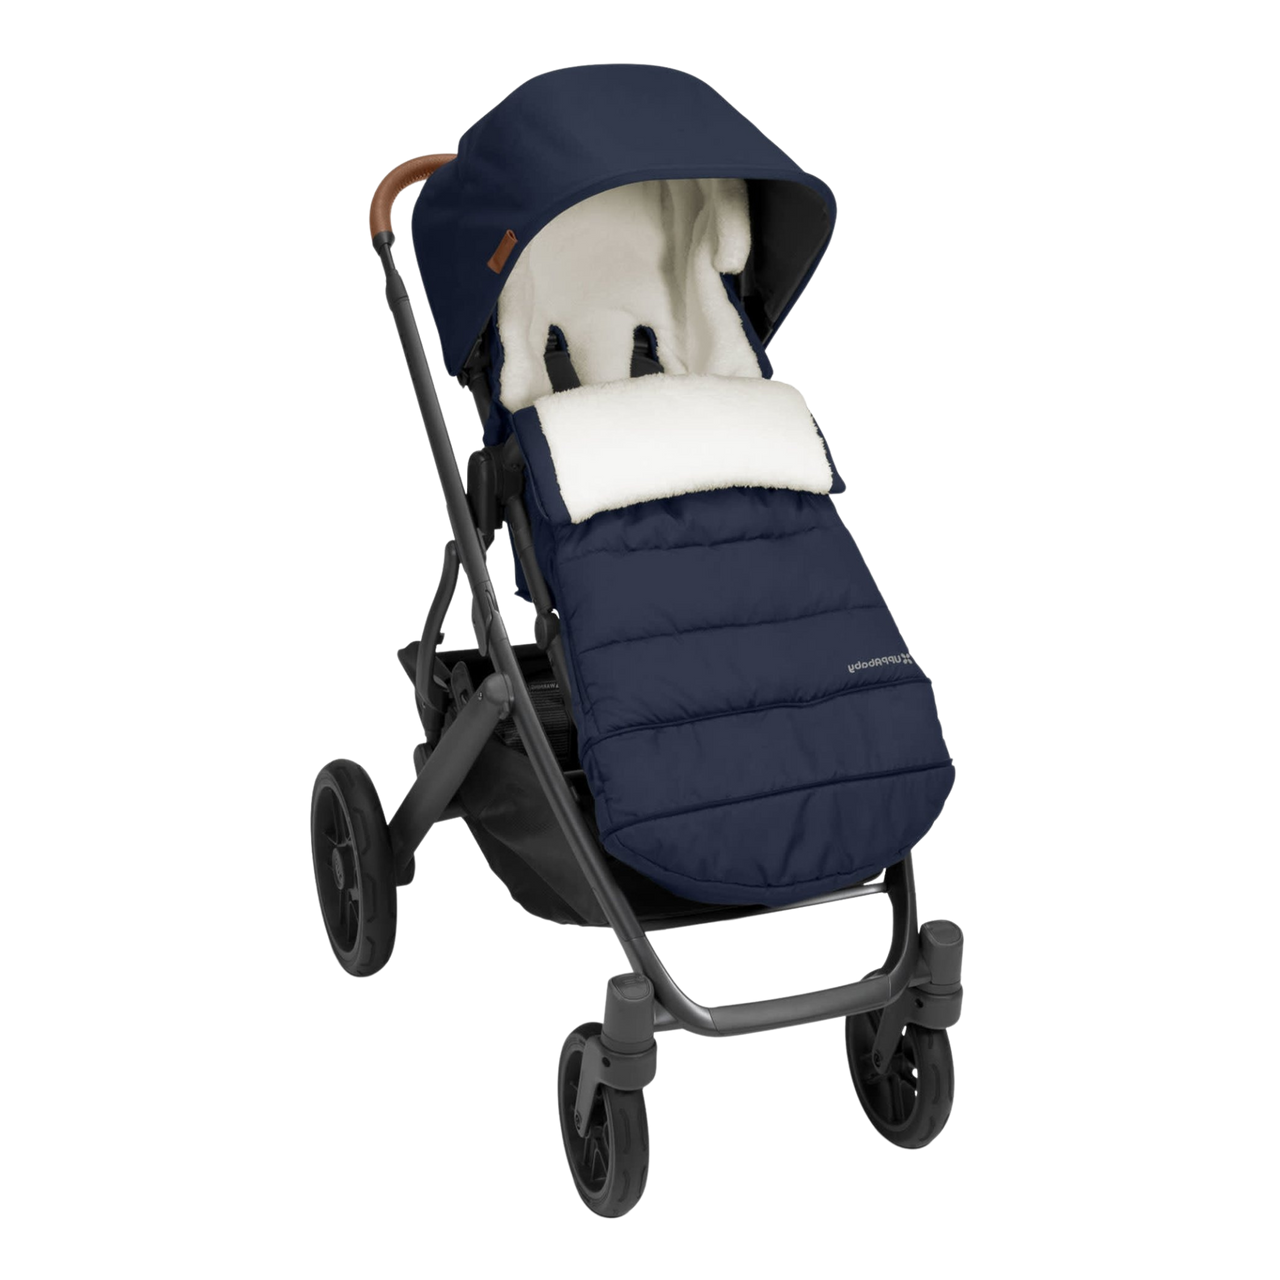 UPPAbaby UPPAbaby - Chancelière pour Poussette